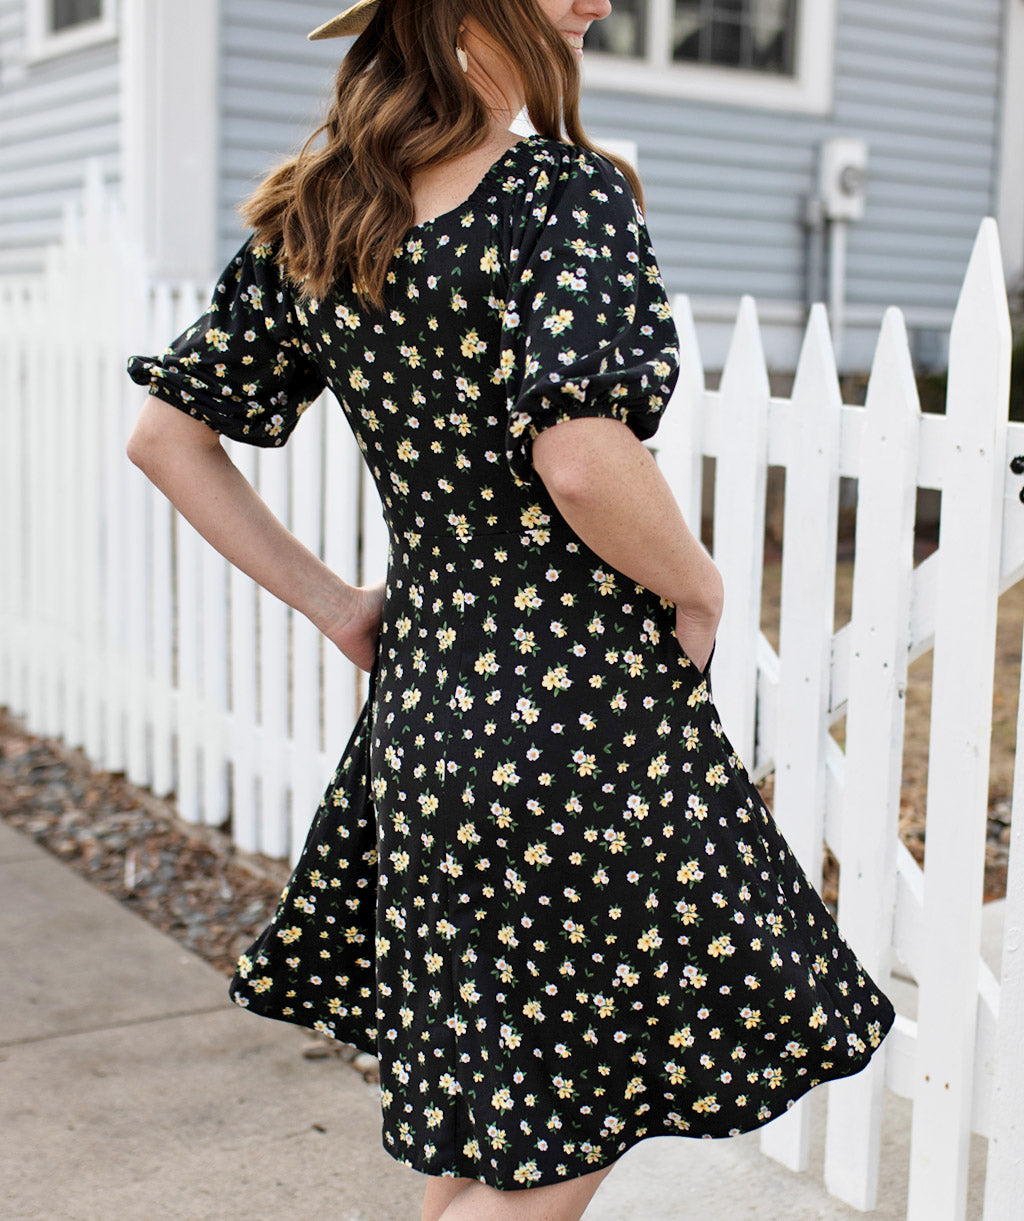 GISEL smocked fit-and-flare dress in Black Floral